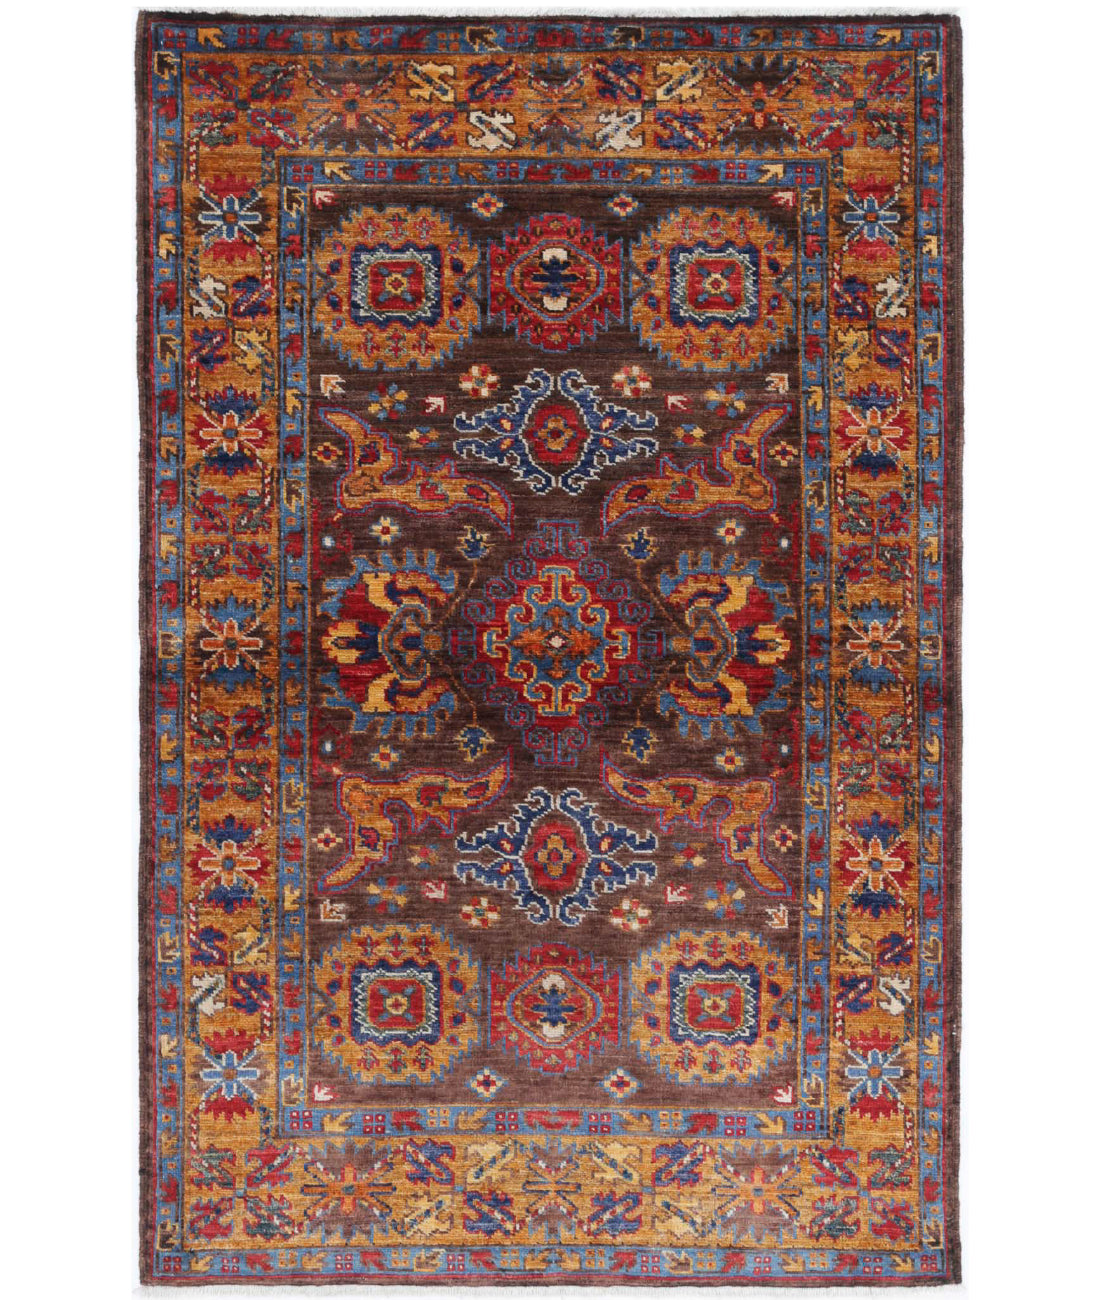 Hand Knotted Nomadic Caucasian Humna Wool Rug - 2'11'' x 4'9'' 2'11'' x 4'9'' (88 X 143) / Brown / Gold